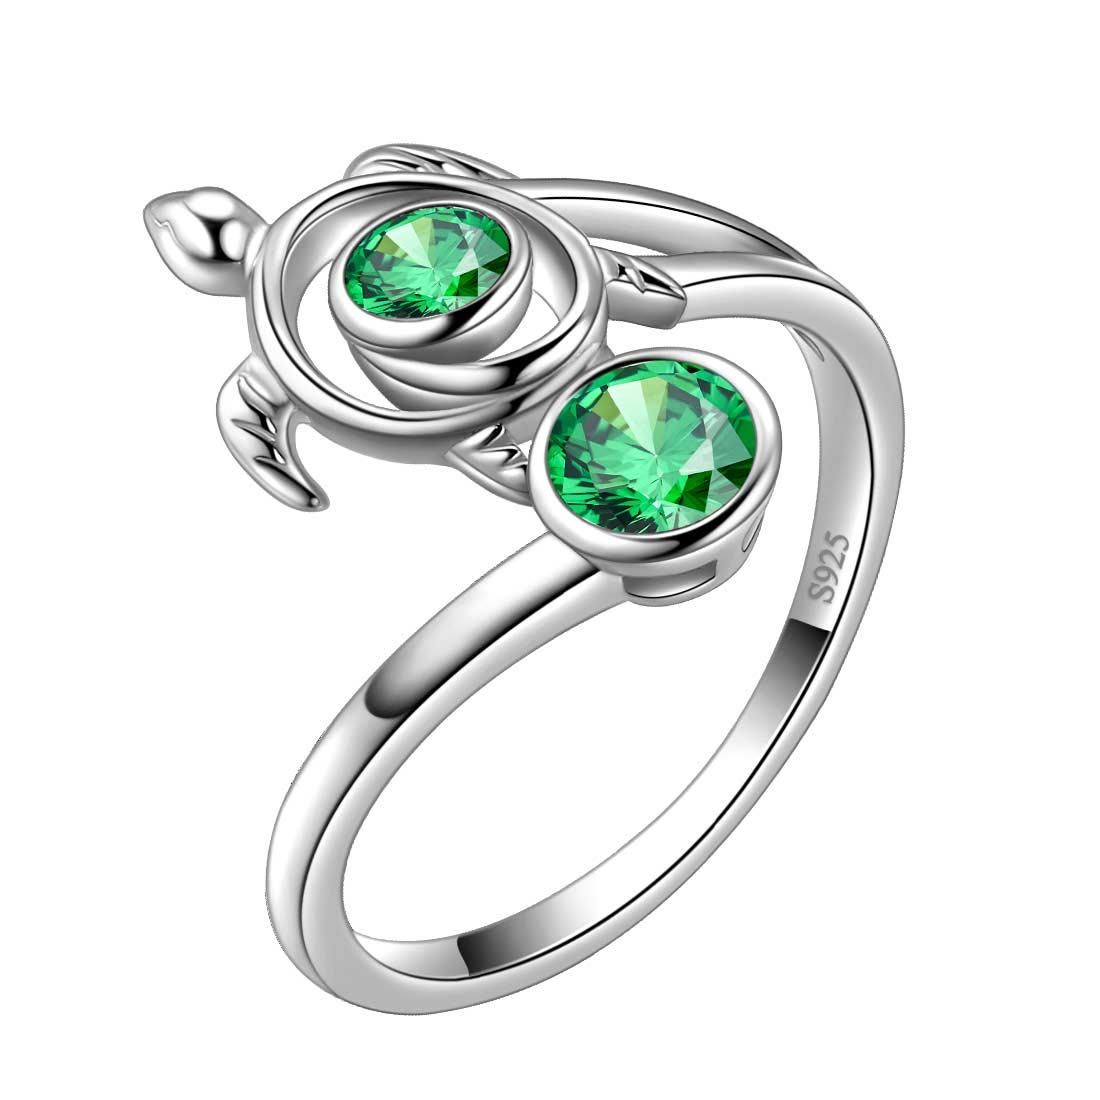 Turtle Birthstone May Emerald Ring Open Sterling Silver - Rings - Aurora Tears